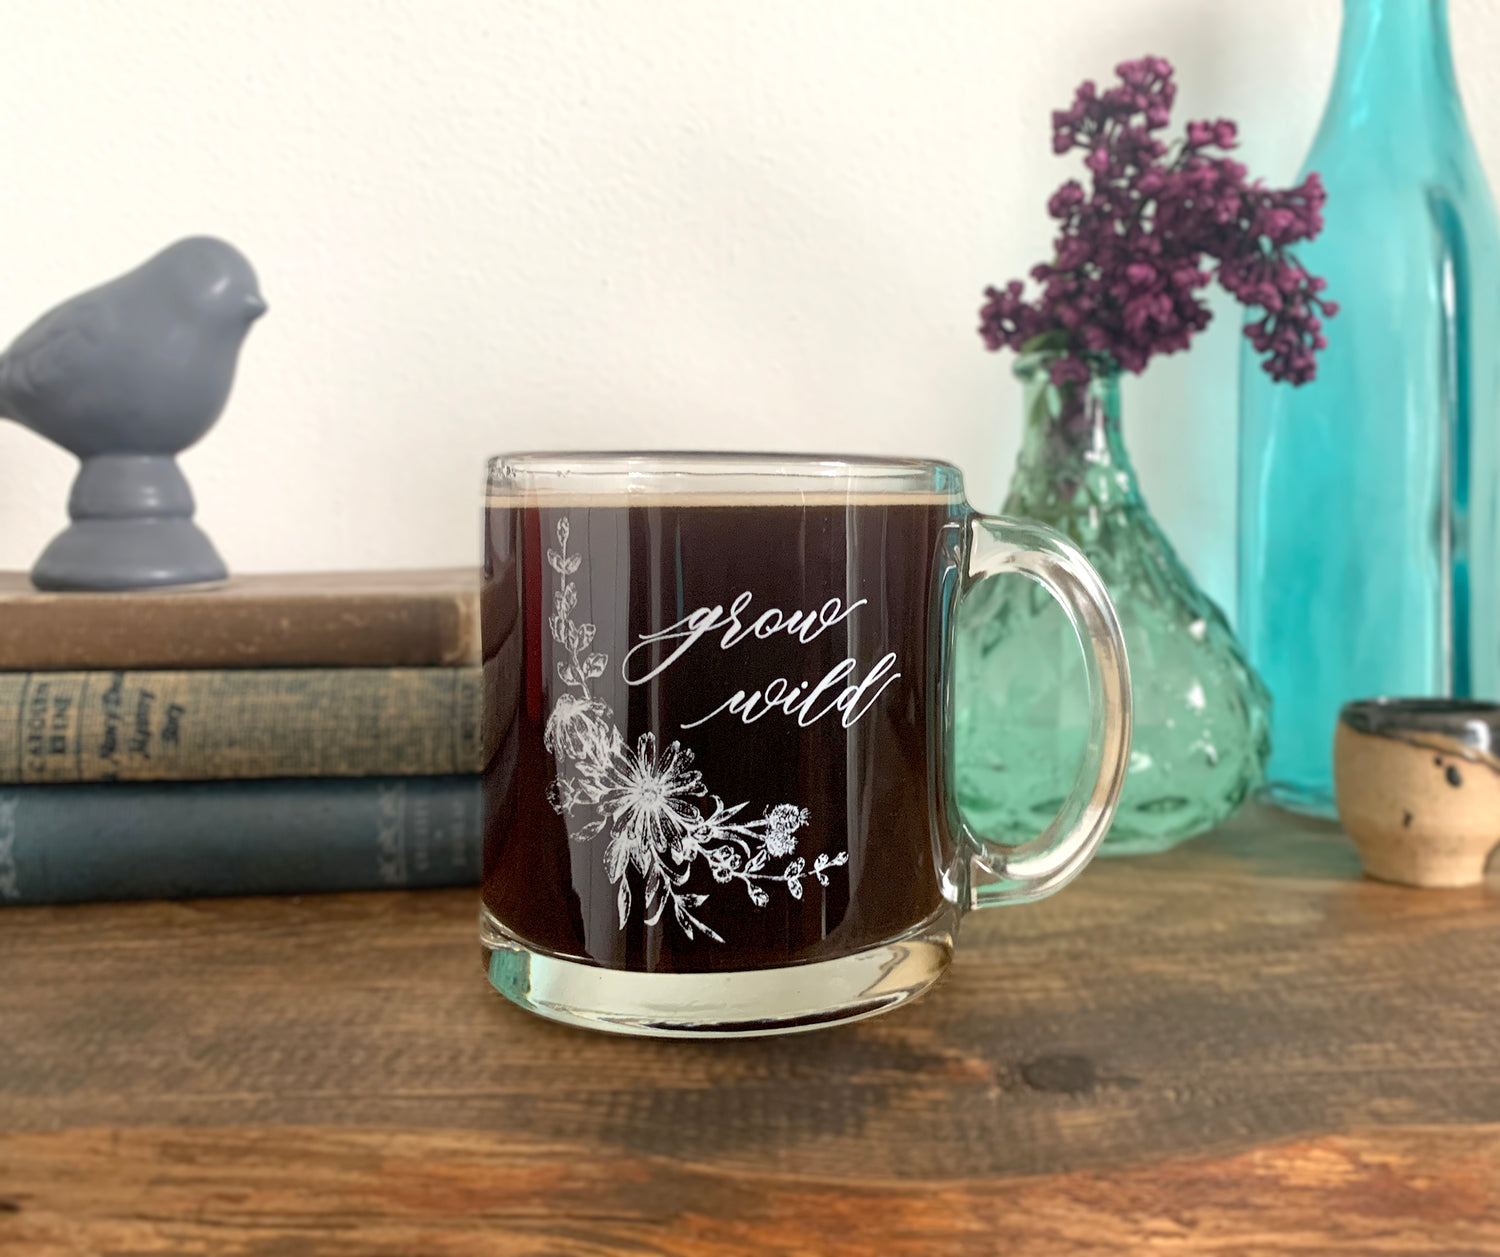 White ink on clear glass mug with flowers and that says "grow wild" by Rust Belt Love